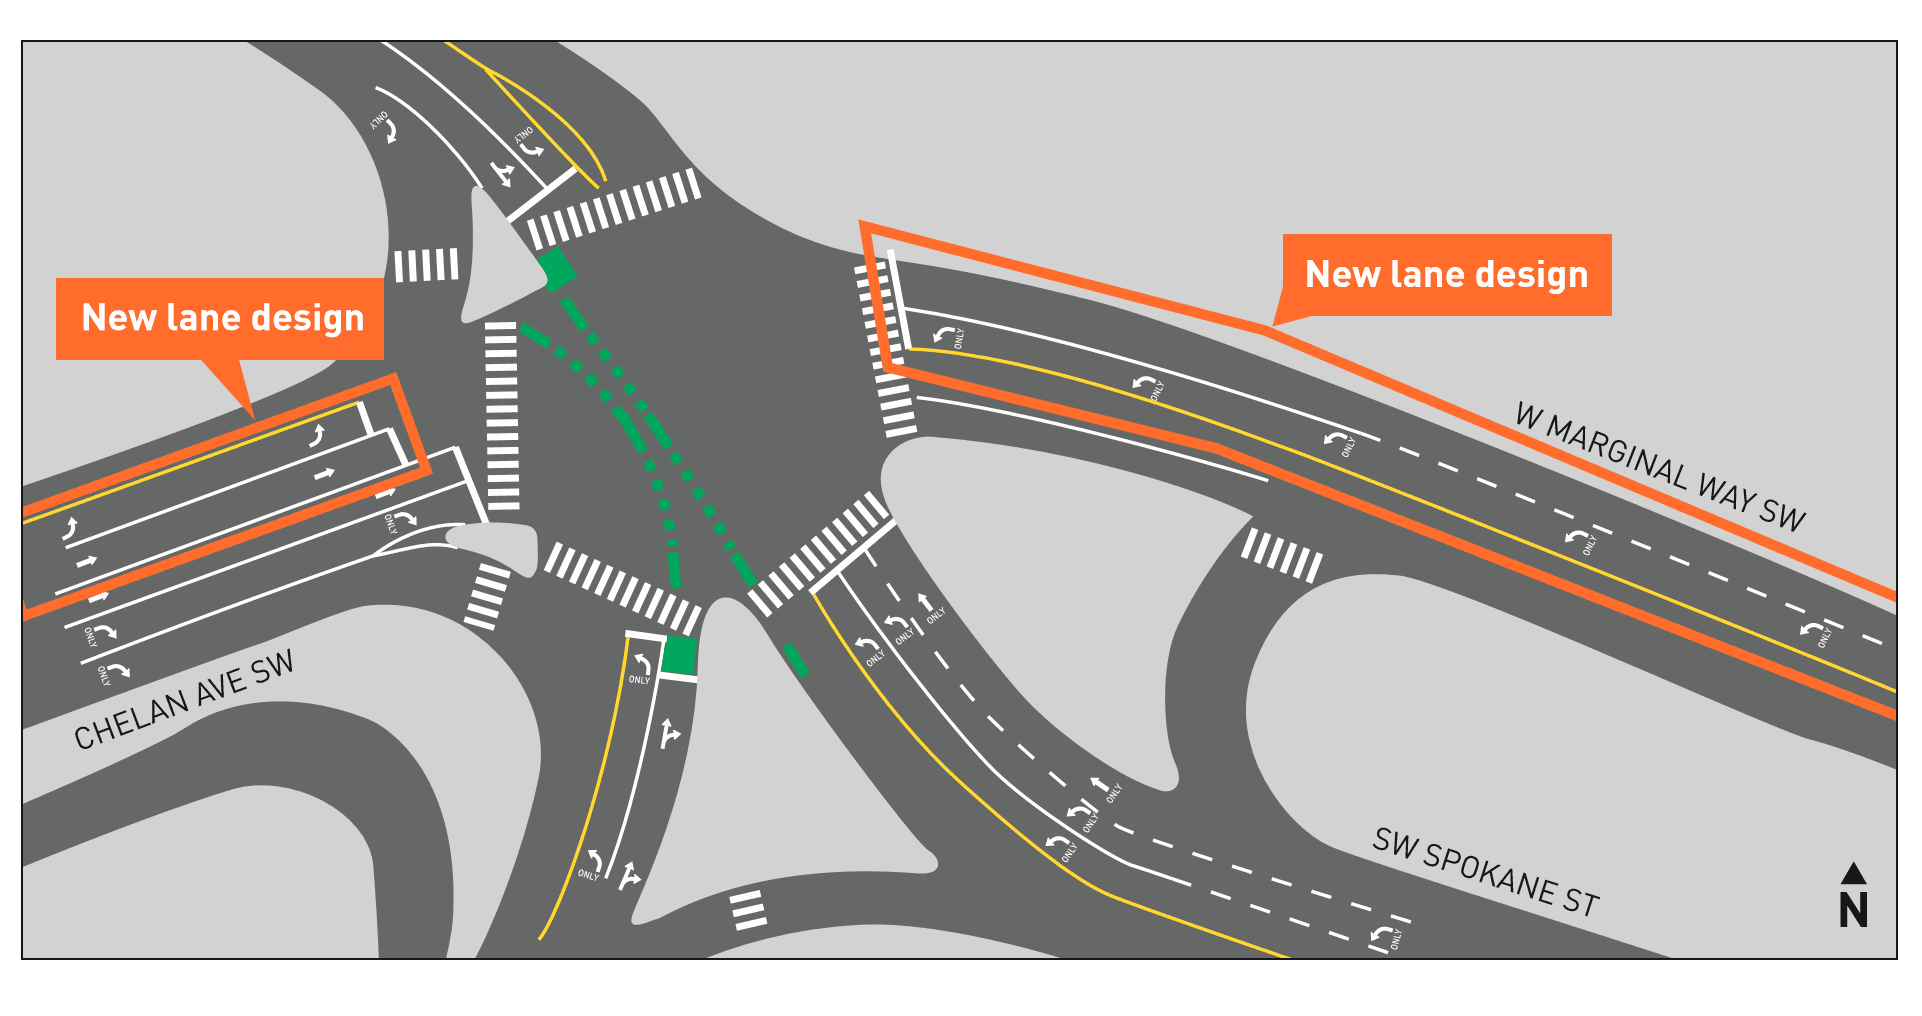 Map showing lane design improvements at intersection of Marginal way SW, Chelane Ave SW and SW Spokane St